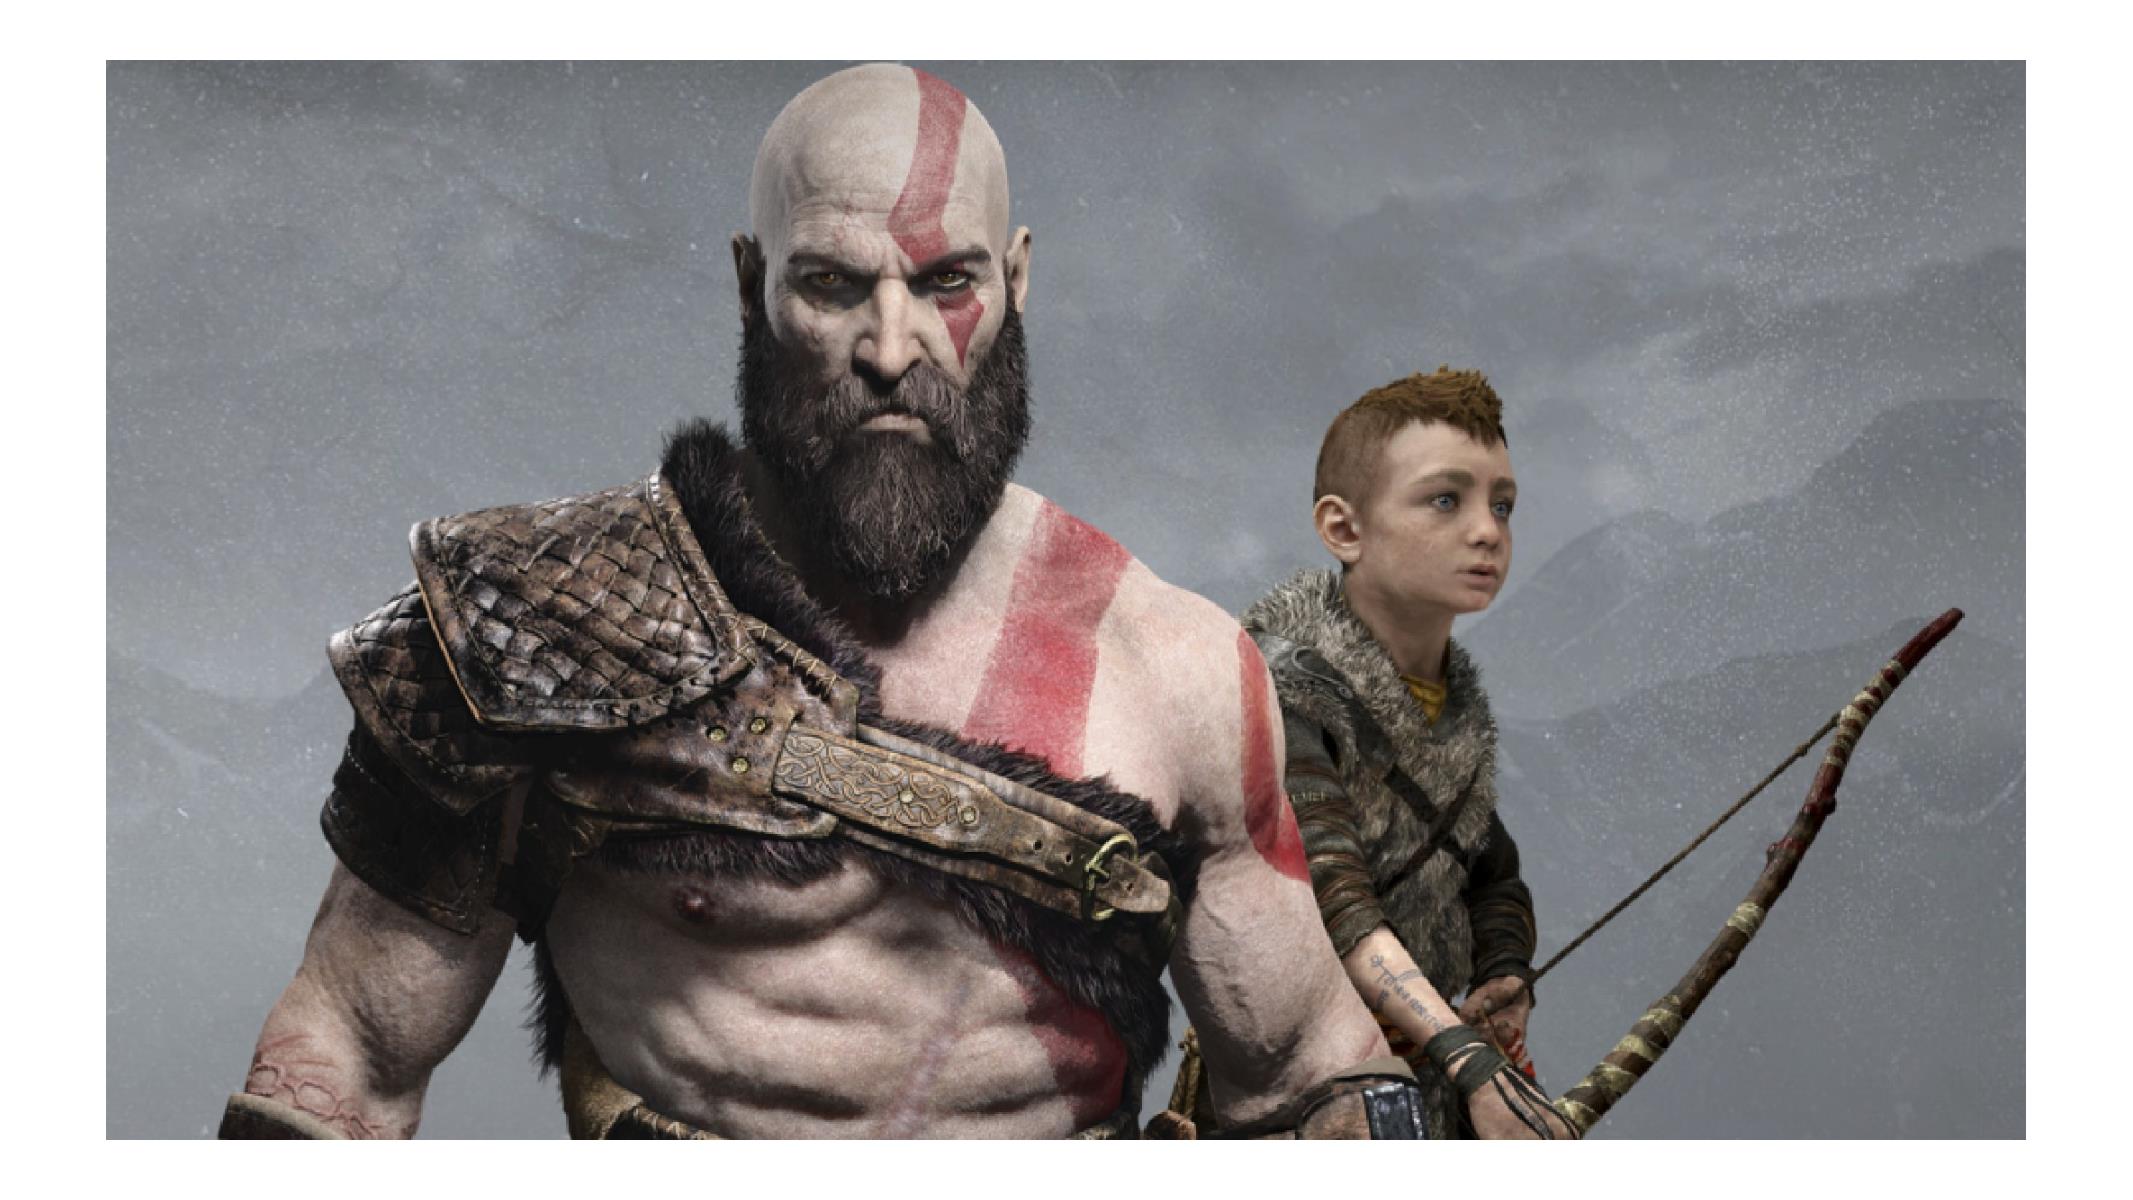 PlayStation 5 teardown details, God of War sequel information, Gotham  Knights release datethe PS5 rumor flood continues unabated -   News